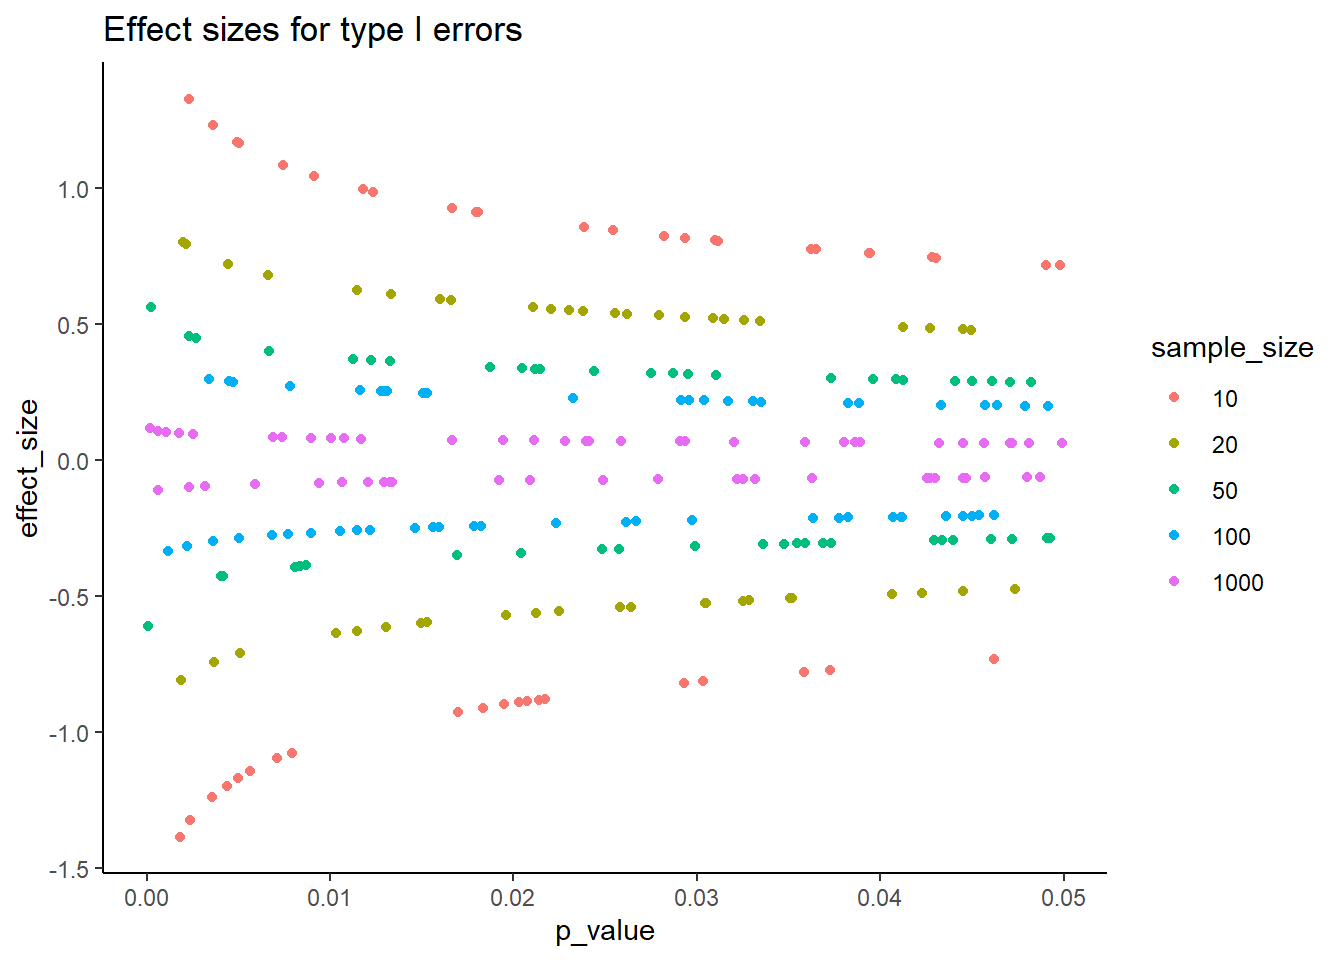 Effect size as a function of p-values for type 1 Errors under the null, for a paired samples t-test.